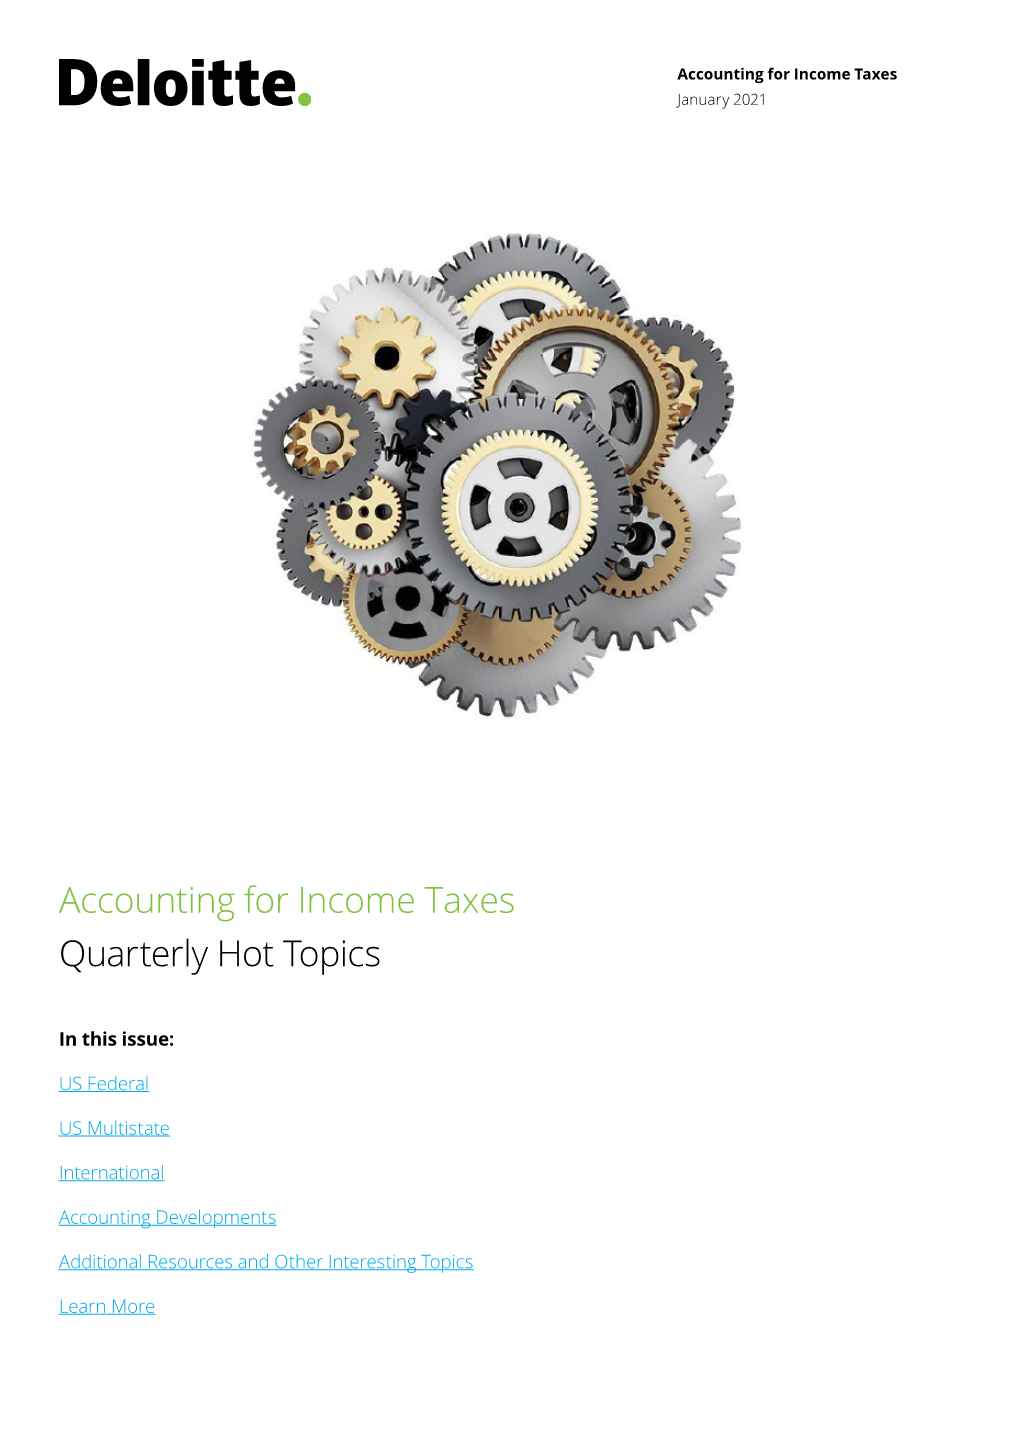 Accounting for Income Taxes: Quarterly Hot Topics